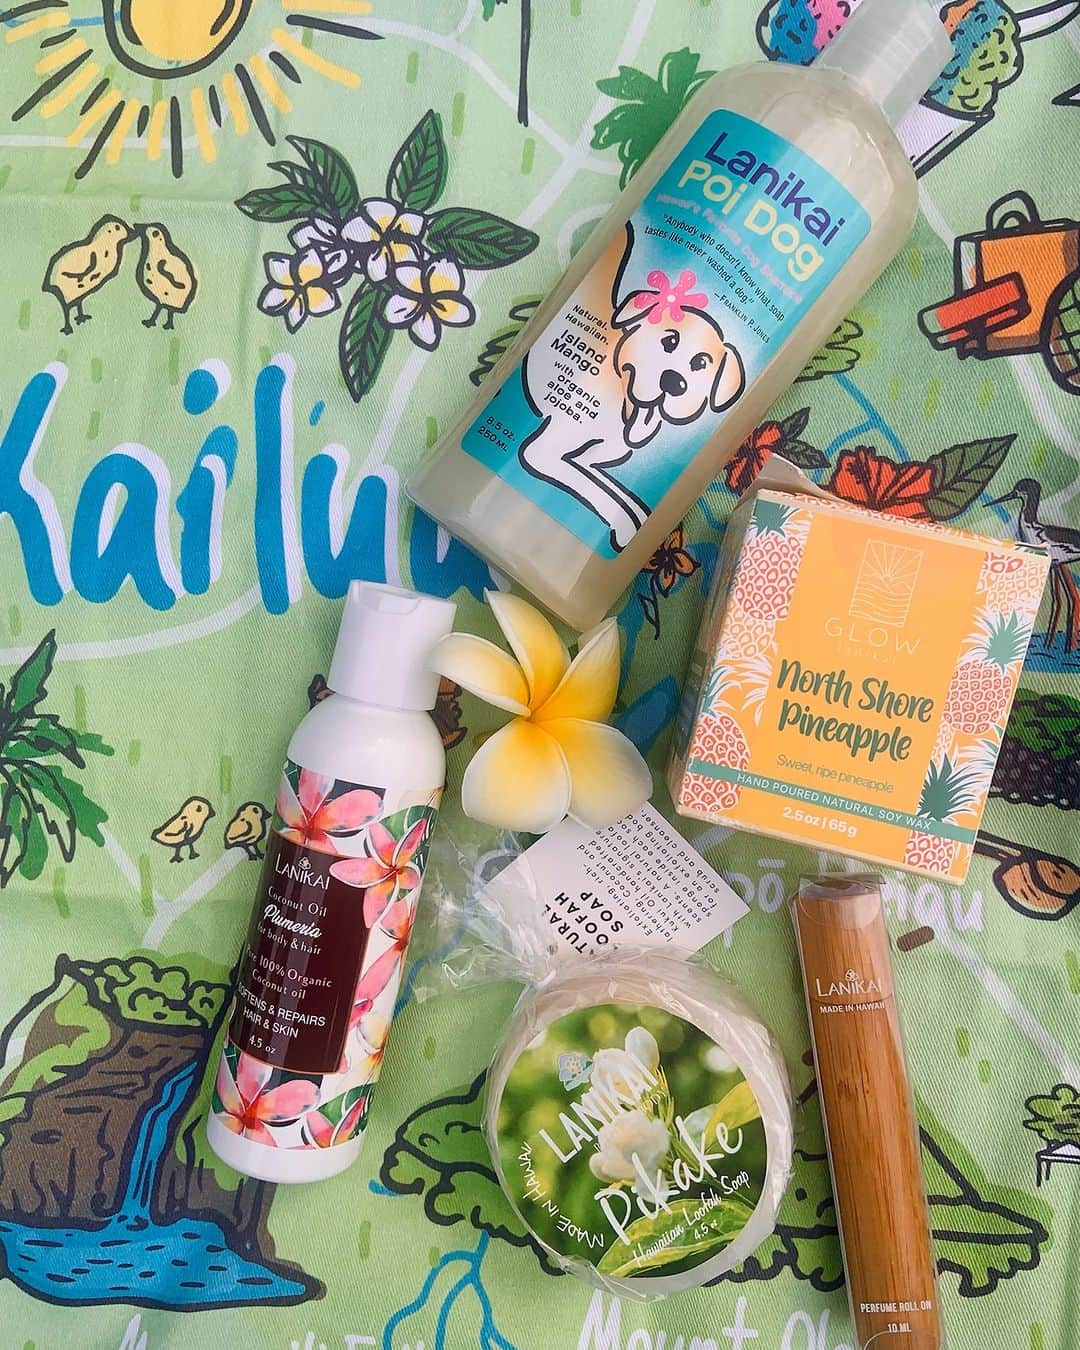 Lanikai Bath and Bodyのインスタグラム：「Going shopping? Come say hello in Kailua and pick up some Lanikai favorites.   IN STORE, Spend $40 {not incl discounts and taxes} and receive a FREE Lanikai Glow 6 oz soy candle with every purchase. In store only, til end of day Weds 8/2. #kailuatownhi #lanikaibathandbody #LimitedTimeOffer #MidSummerSale」